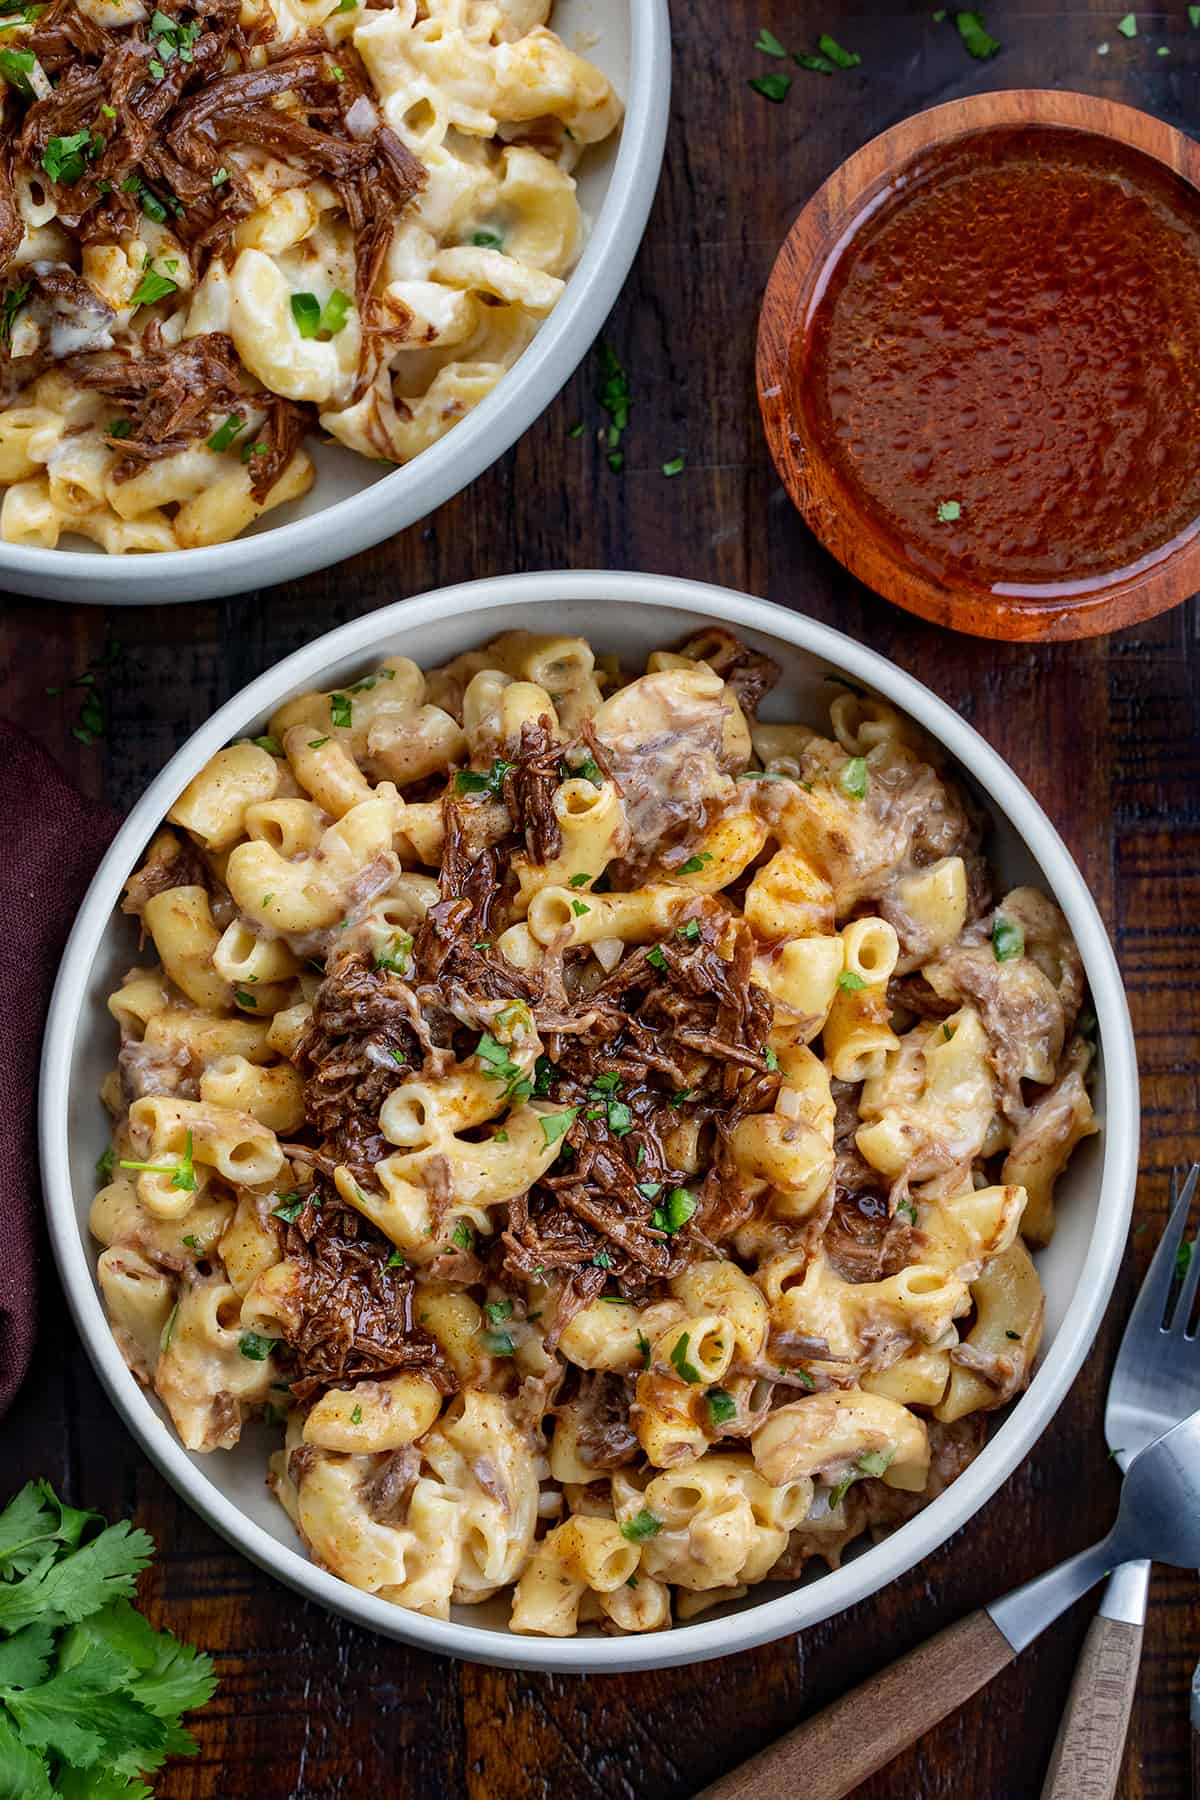 Bowls of Shredded Beef Macaroni and Cheese on a Cutting Board with Sauce.